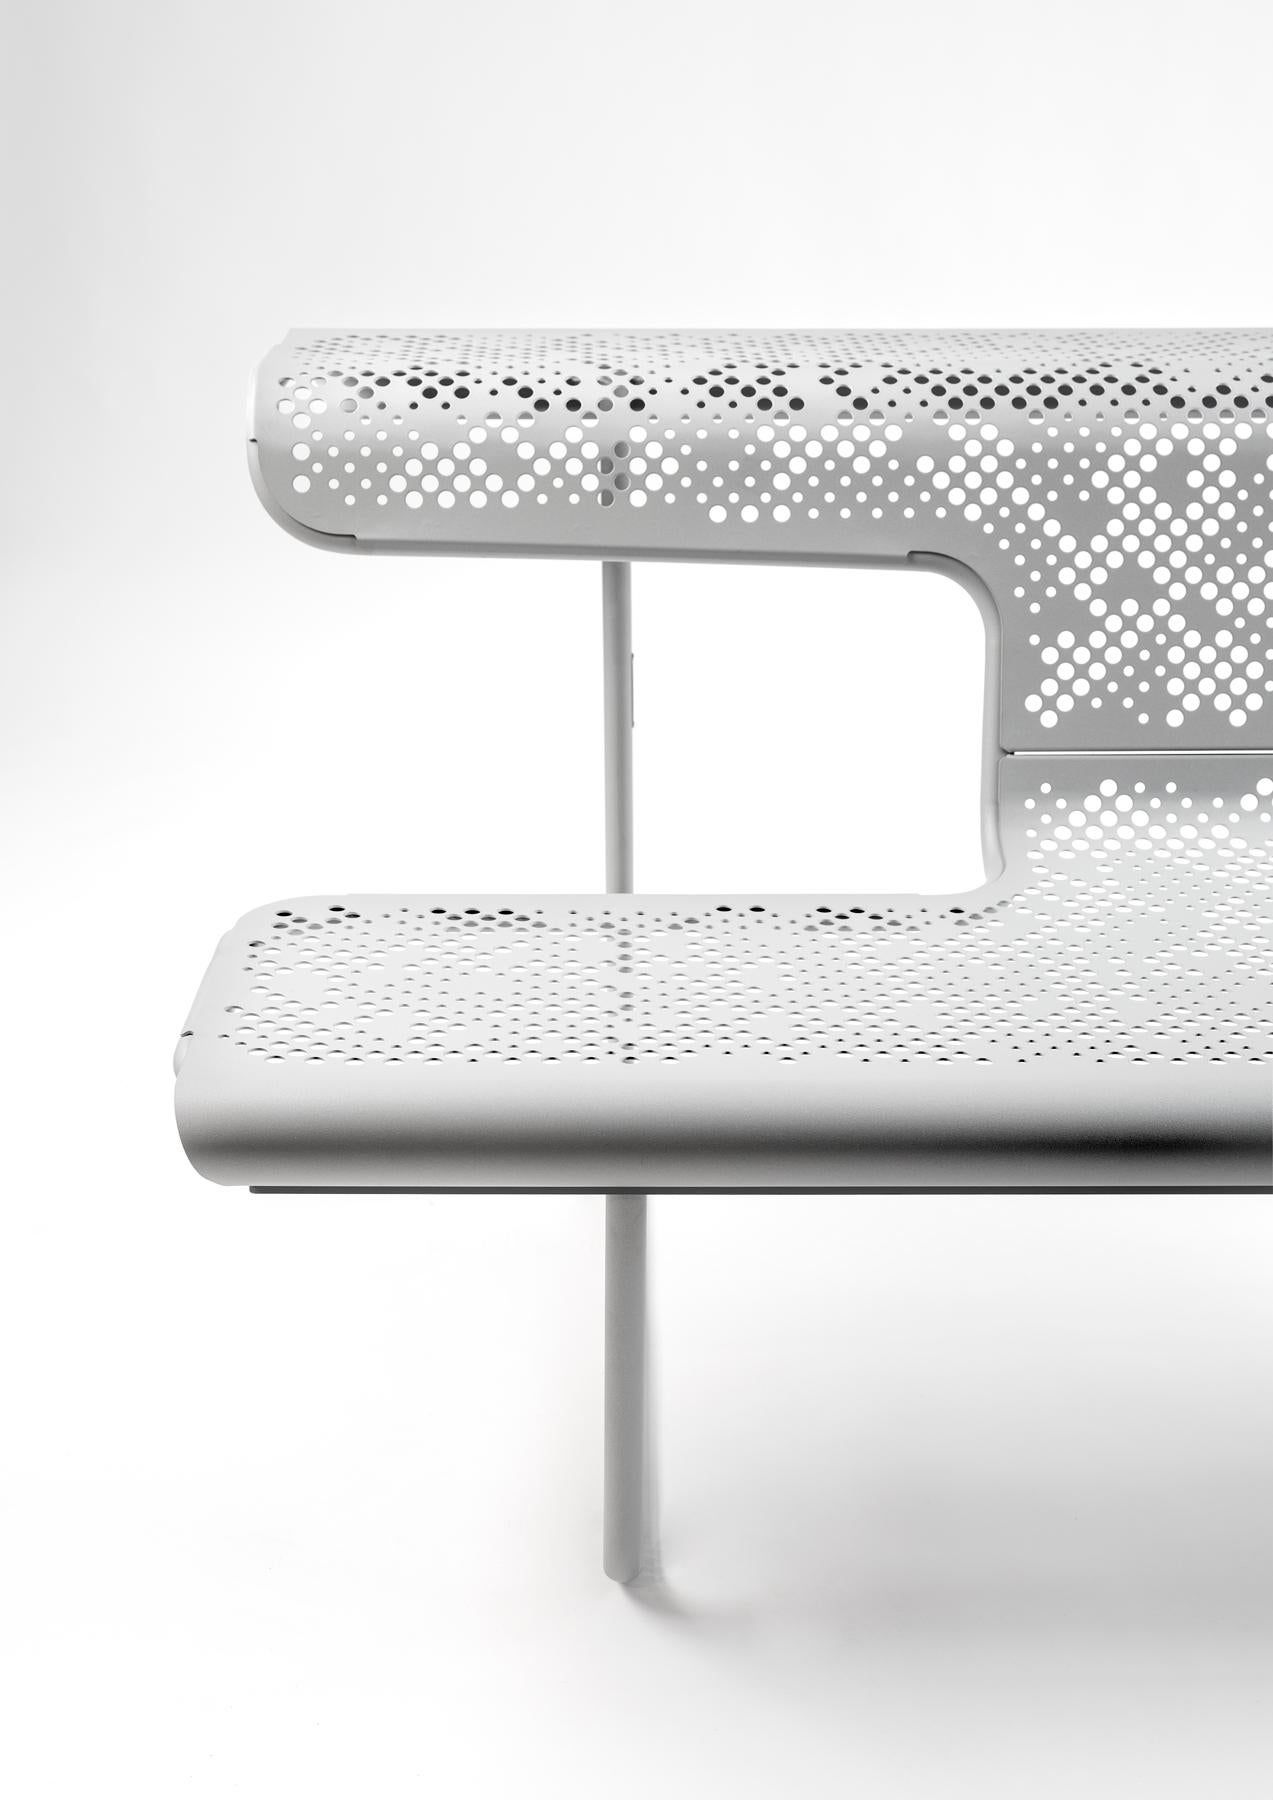 Alfredo Haberli is a great admirer of designs by Oscar Tusquets and Lluis Clotet. As a tribute to the Catalano and Perforano Benches, he designed the Suizos Benches Collection in perforated painted steel. Out of all the benches, The Poet Bench has